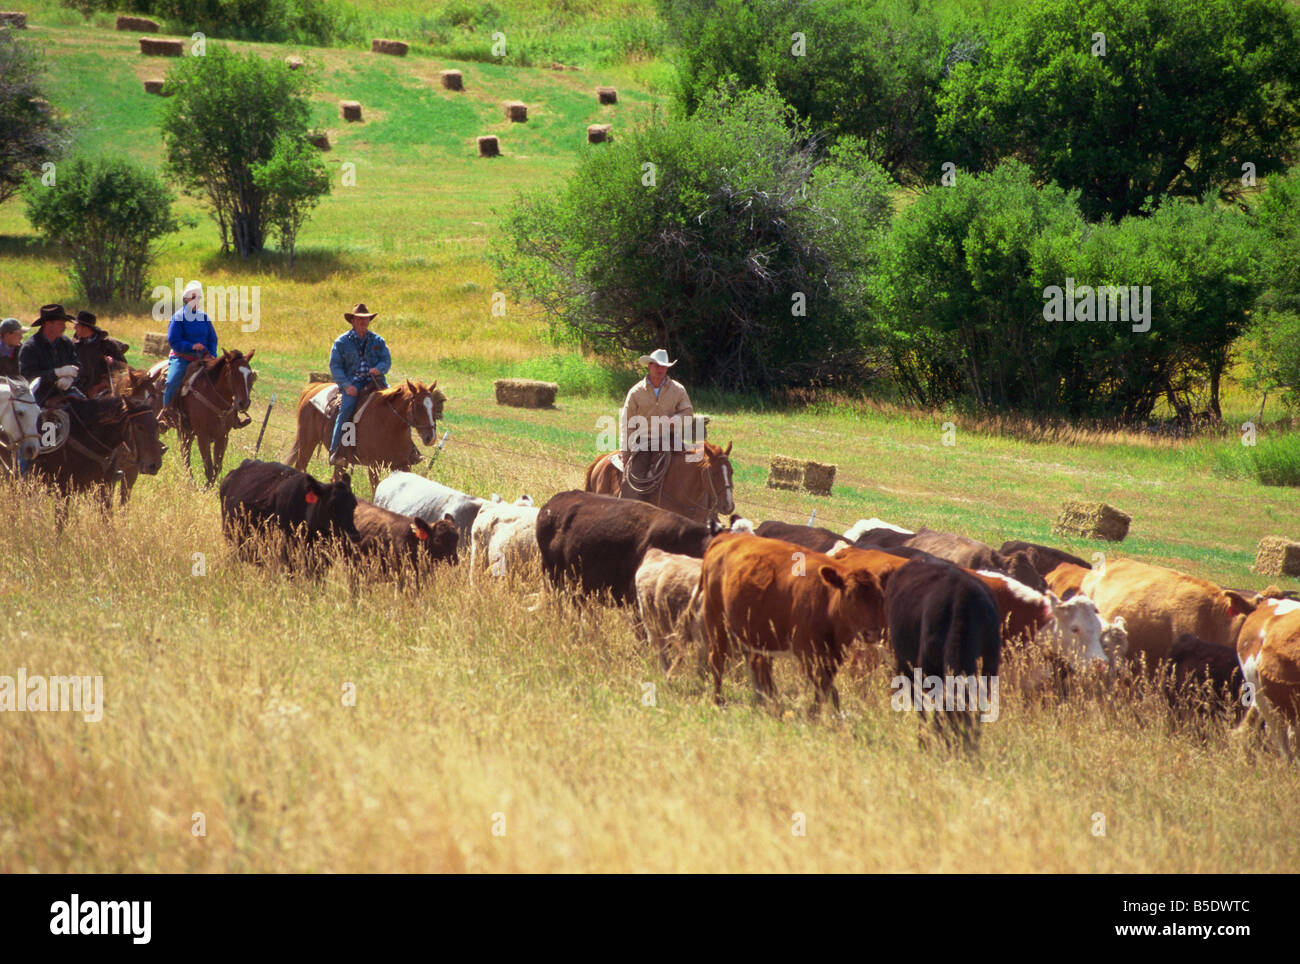 Cattle round-up in high pasture, Lonesome Spur Ranch, Lonesome Spur, Montana, USA, North America Stock Photo